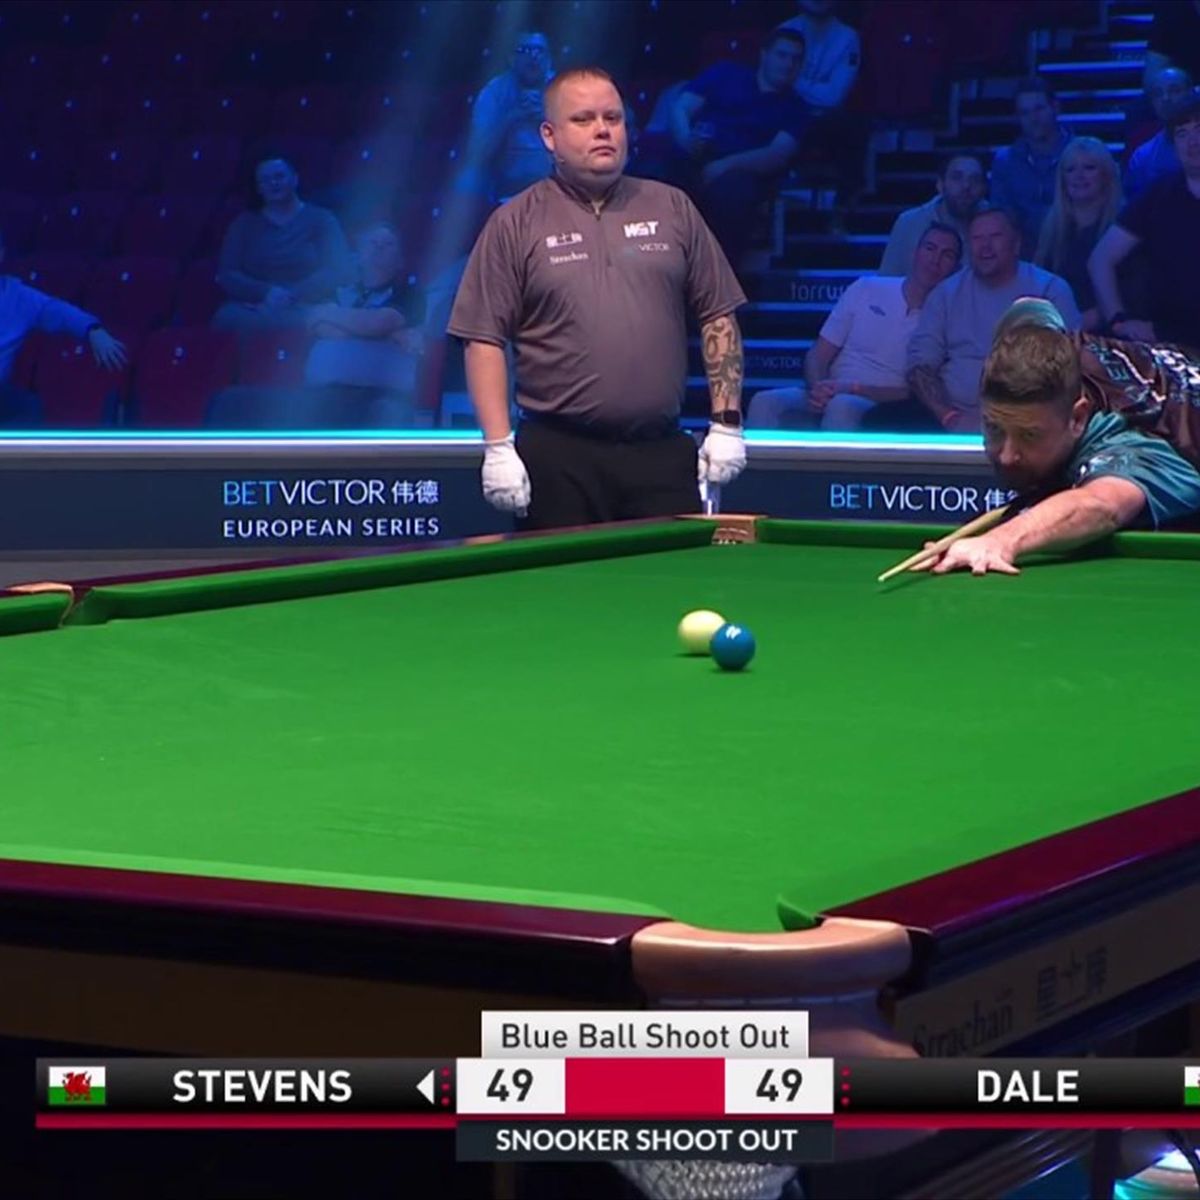 Most dramatic finish so far - Dominic Dale beats Matthew Stevens in Blue Ball Shoot Out - Snooker video